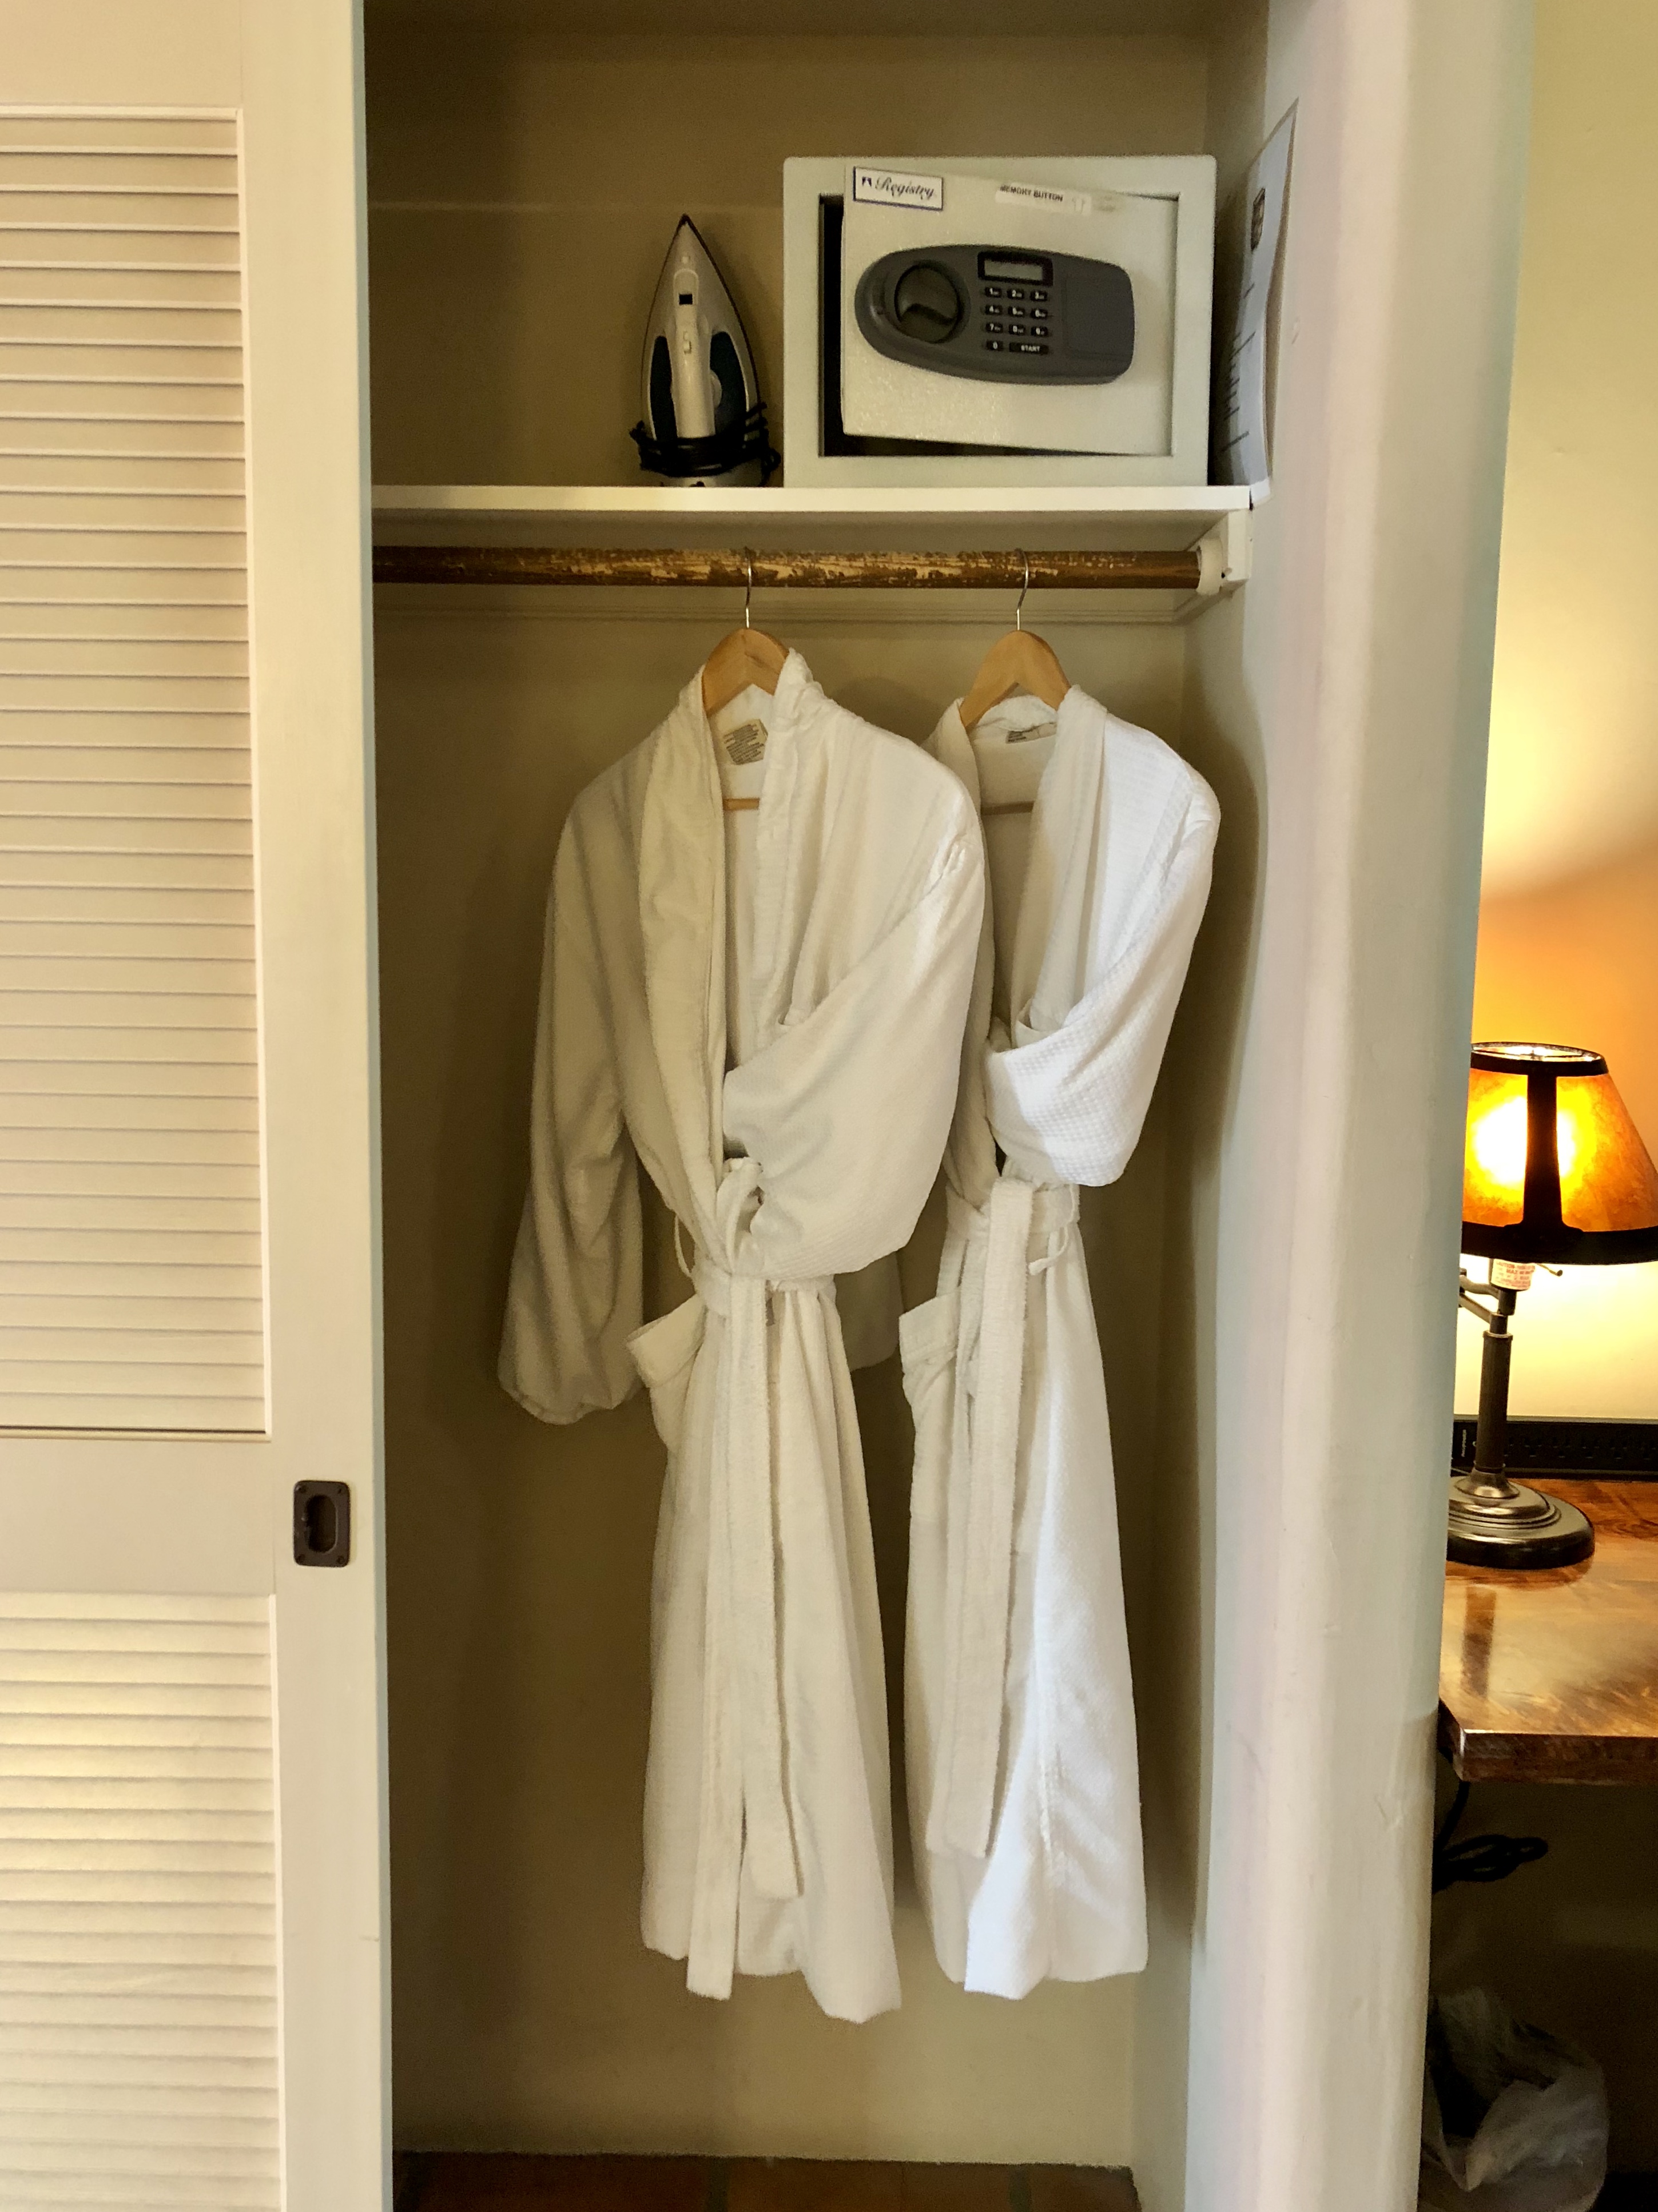 Robes for guests